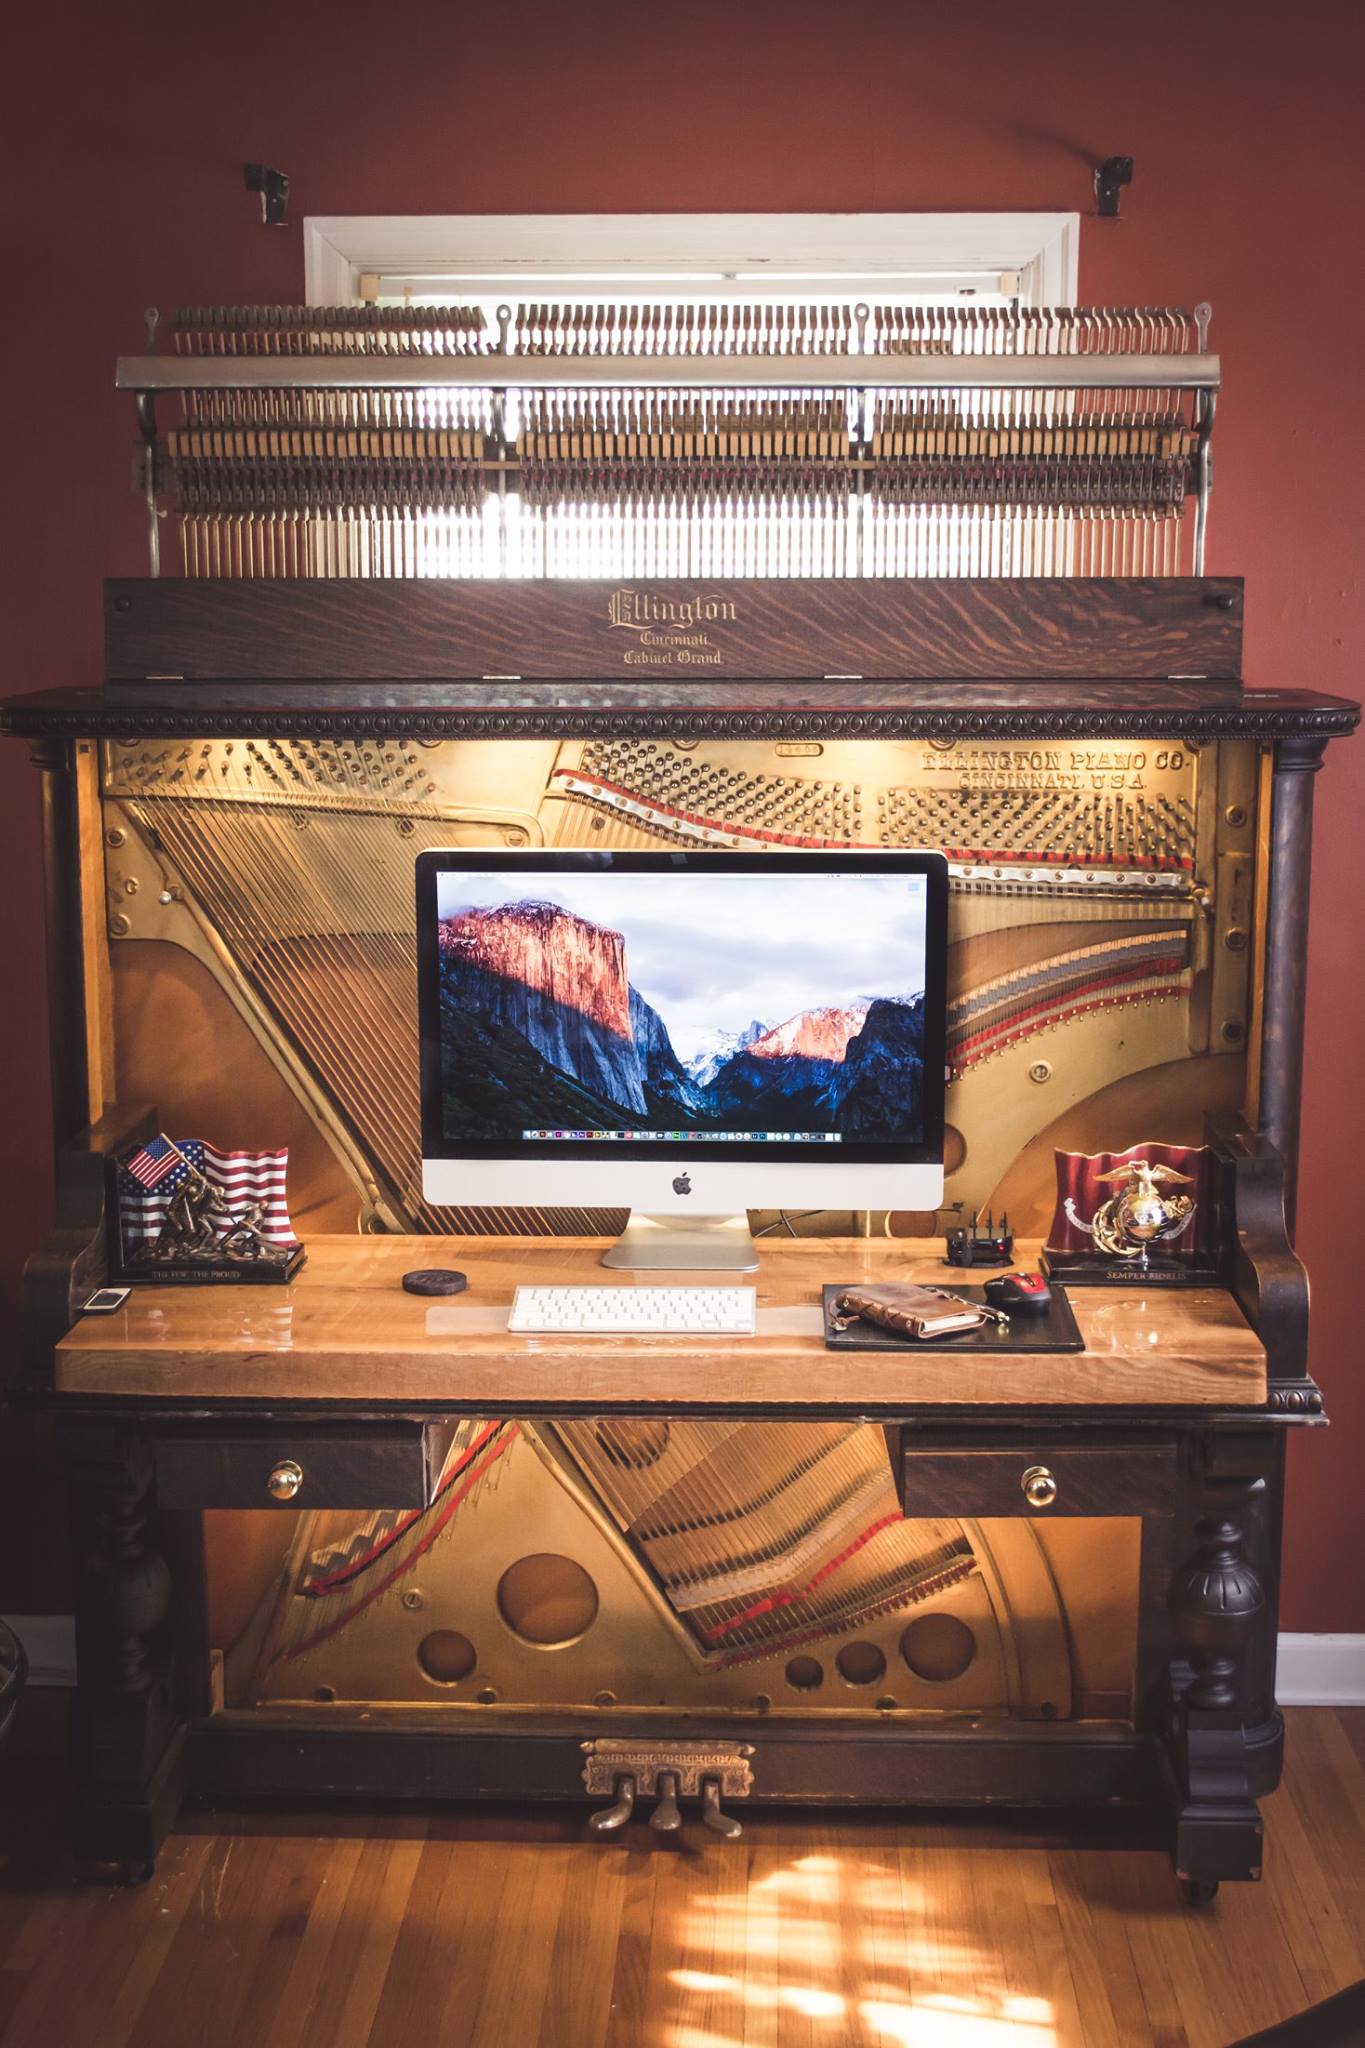 "Seeing how this piano serviced the great depression, WW1, WW2, Korea, Vietnam, Desert Storm, and to this day, brings me such happiness, to know I have a little piece of history right in my own home."